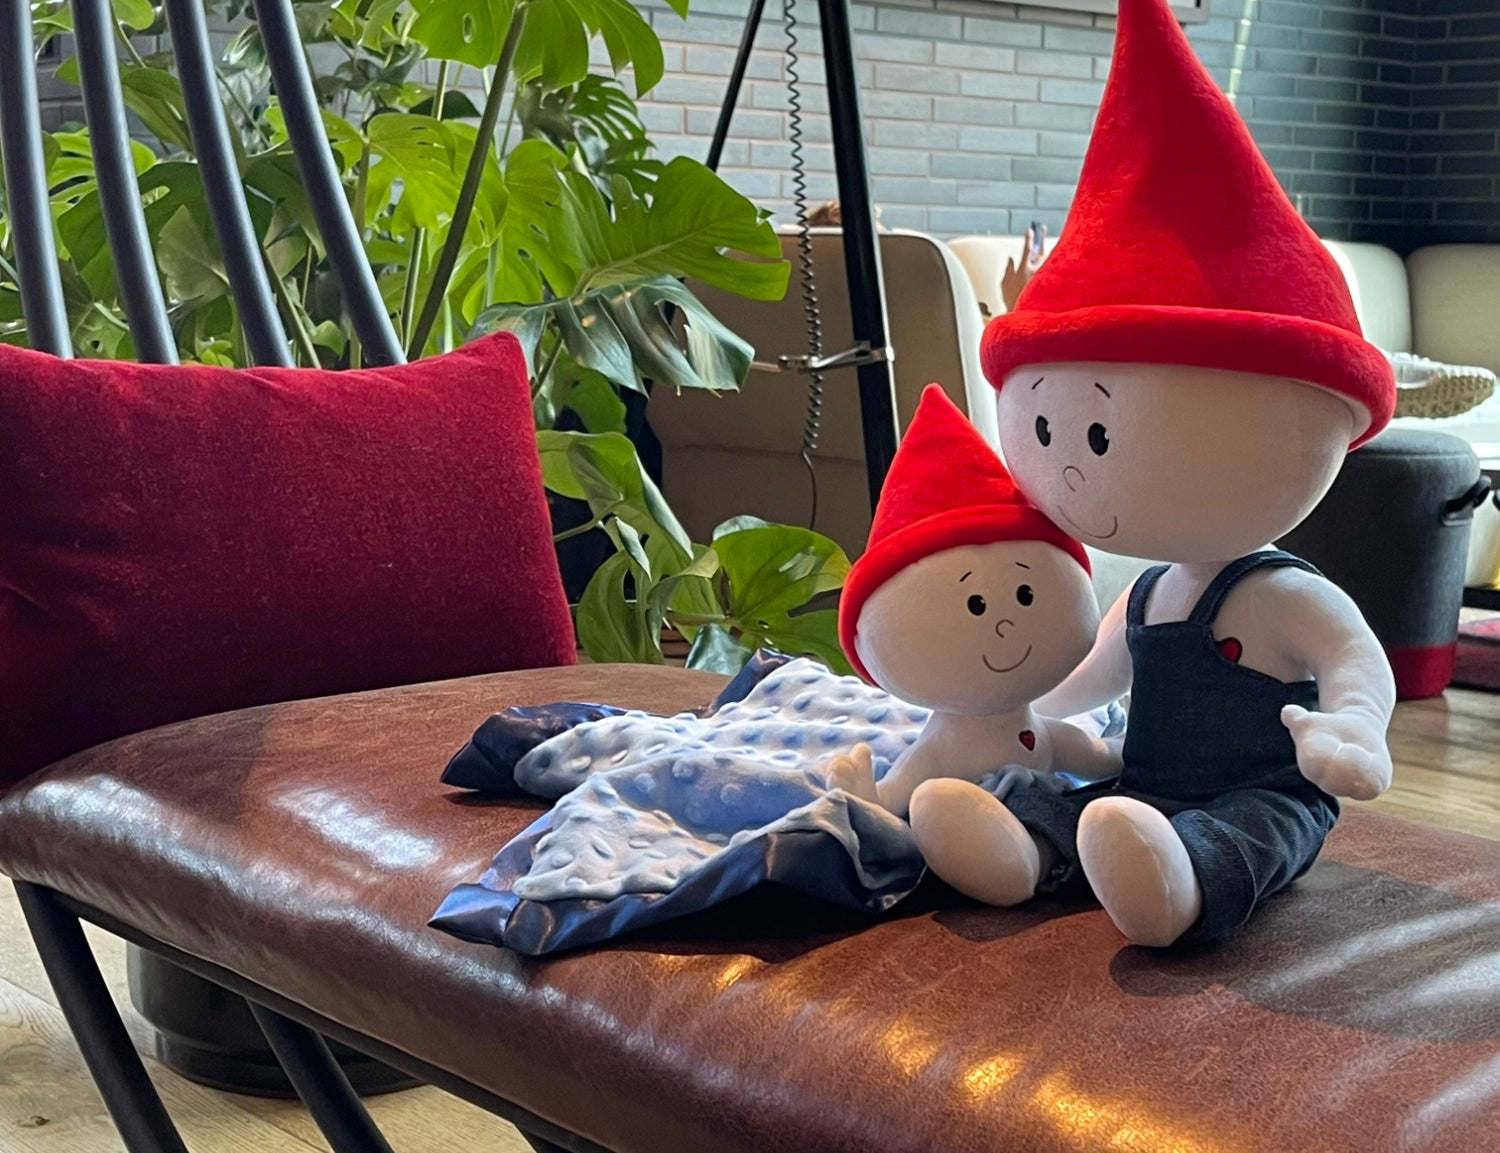 The Gnome Doll and Gnome Lovey sitting together on a brown leather bench in a family's living room. The doll is white with a red pointy gnome hat and denim overalls. The gnome lovey is a smaller white stuffed doll with a red pointy hat and is attached to a light blue blanket with navy blue trim.